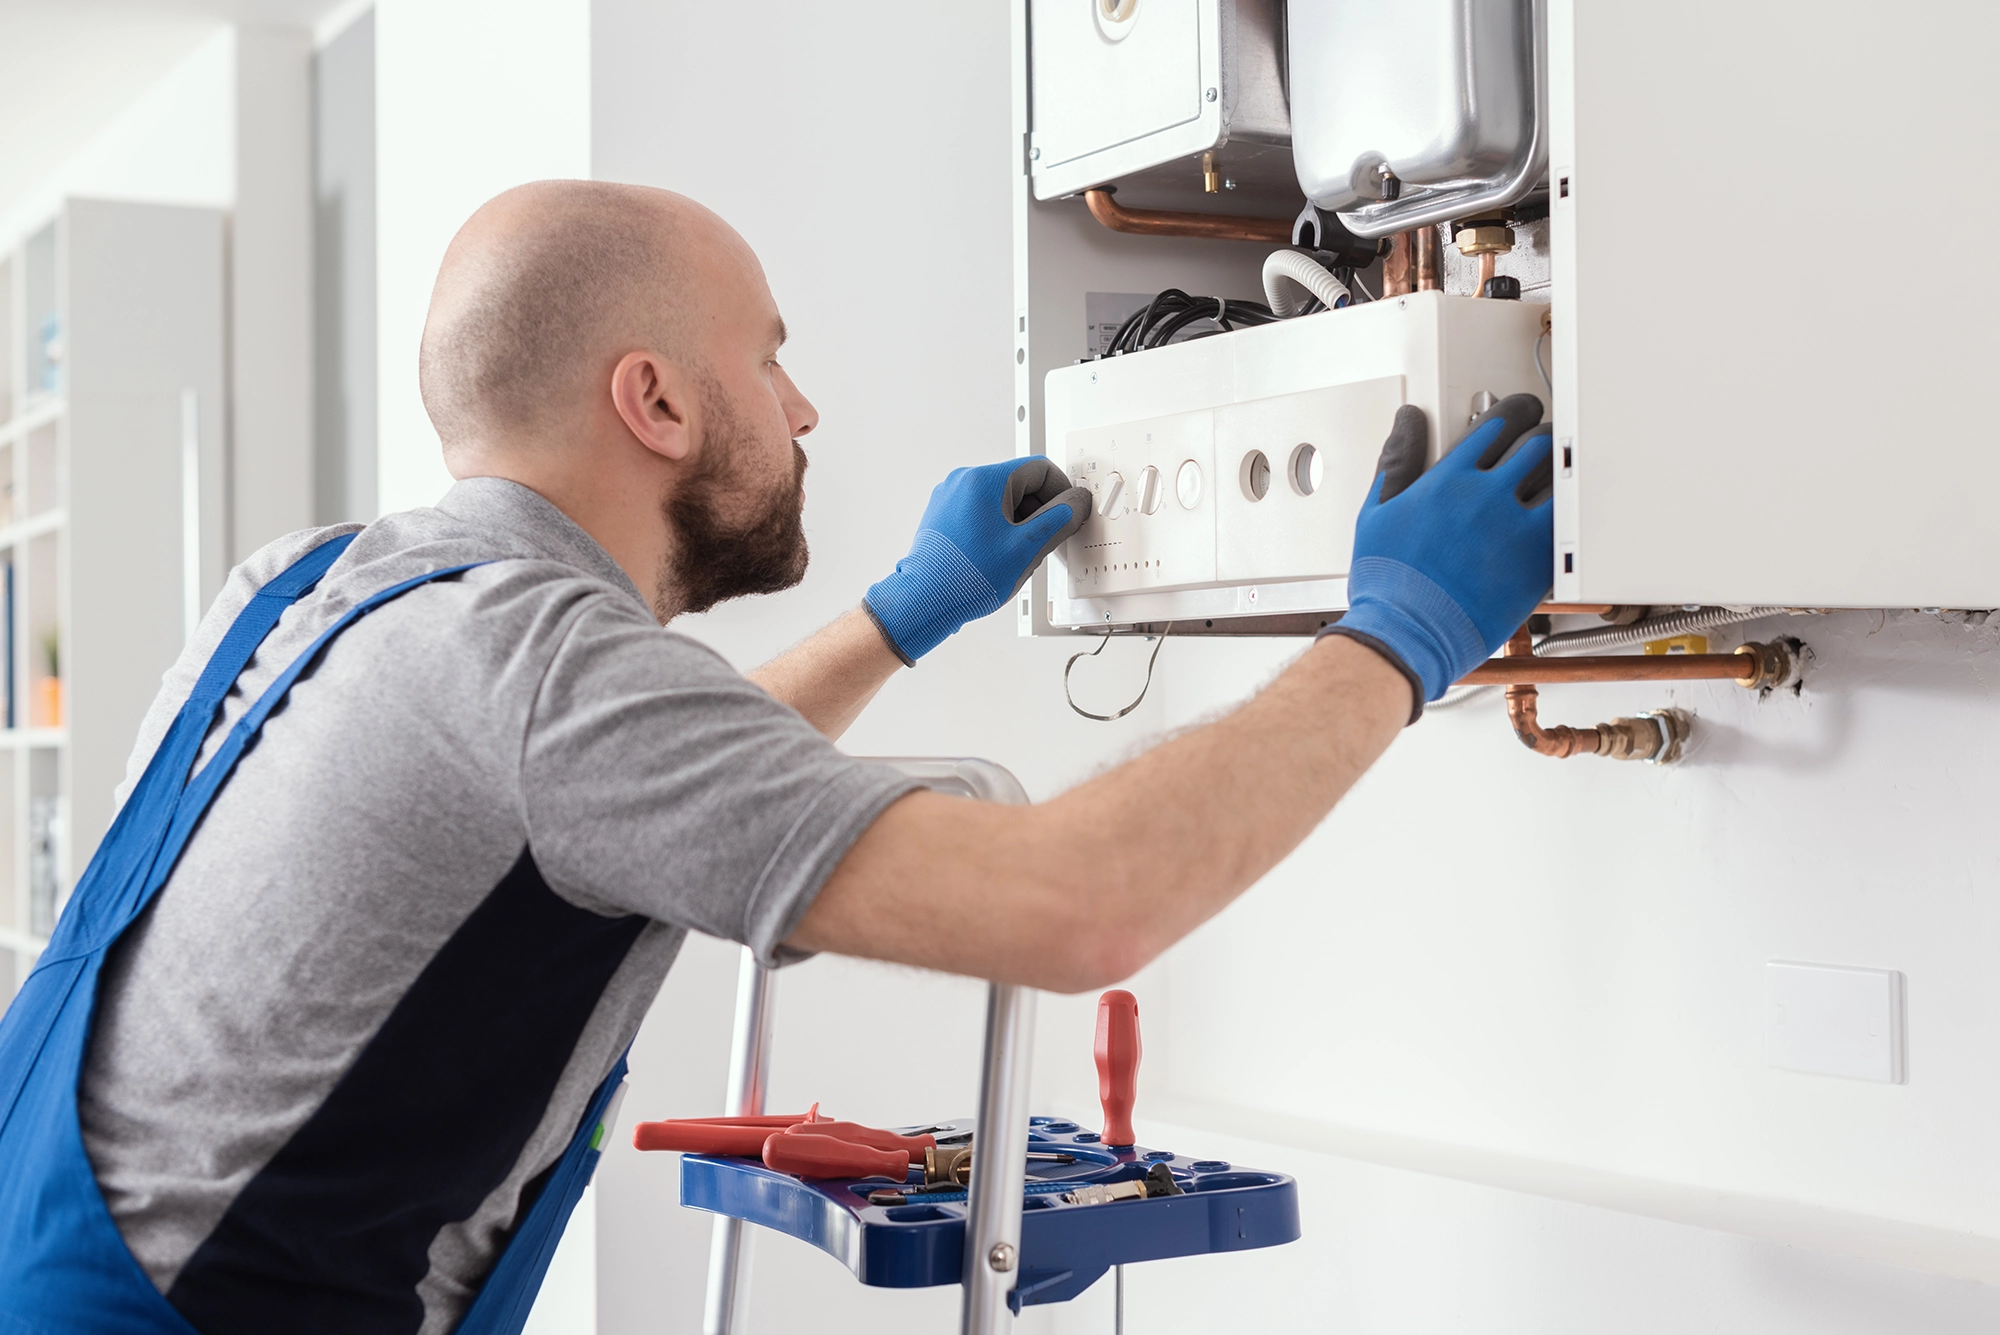 Image of an engineer with a beard and blue gloves inspecting a boiler in a white room, after completing a powerflush service.